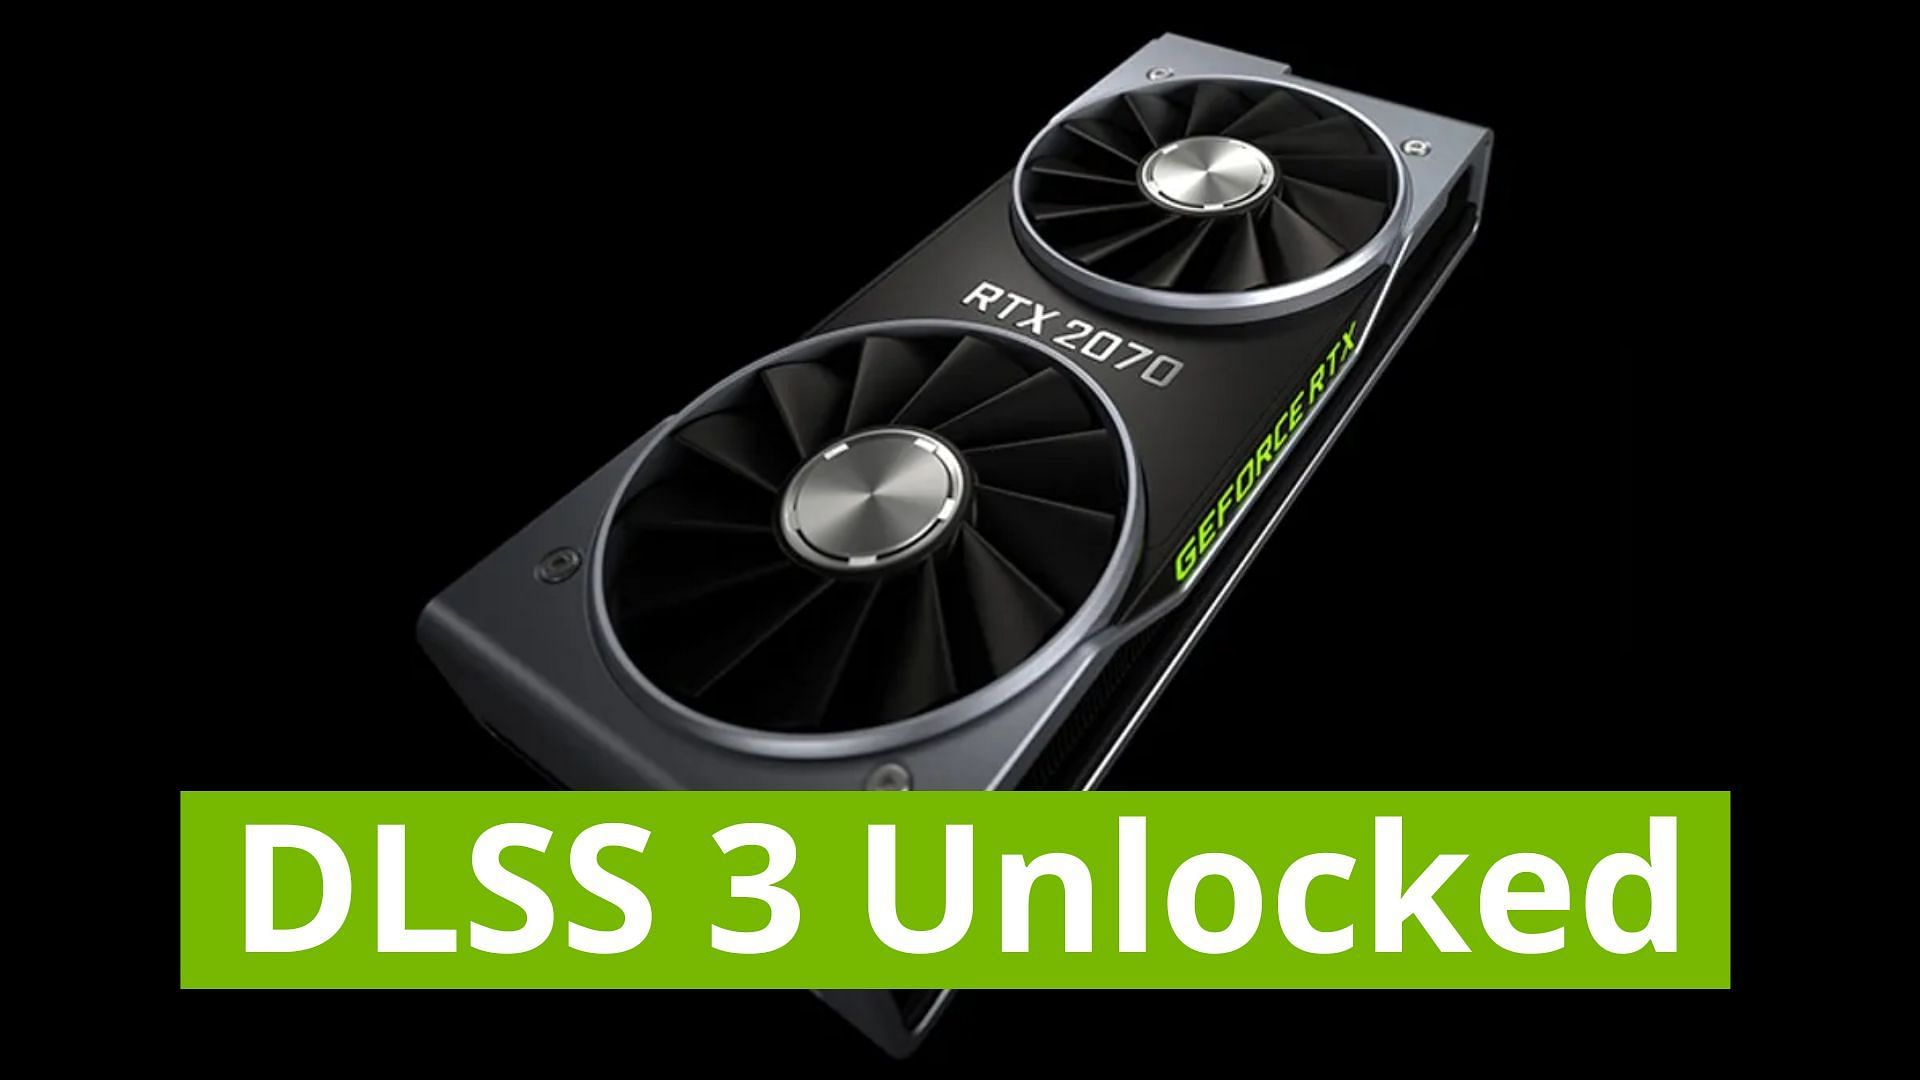 Latest mod allows DLSS 3 to work on RTX 20 series (Image via Nvidia)